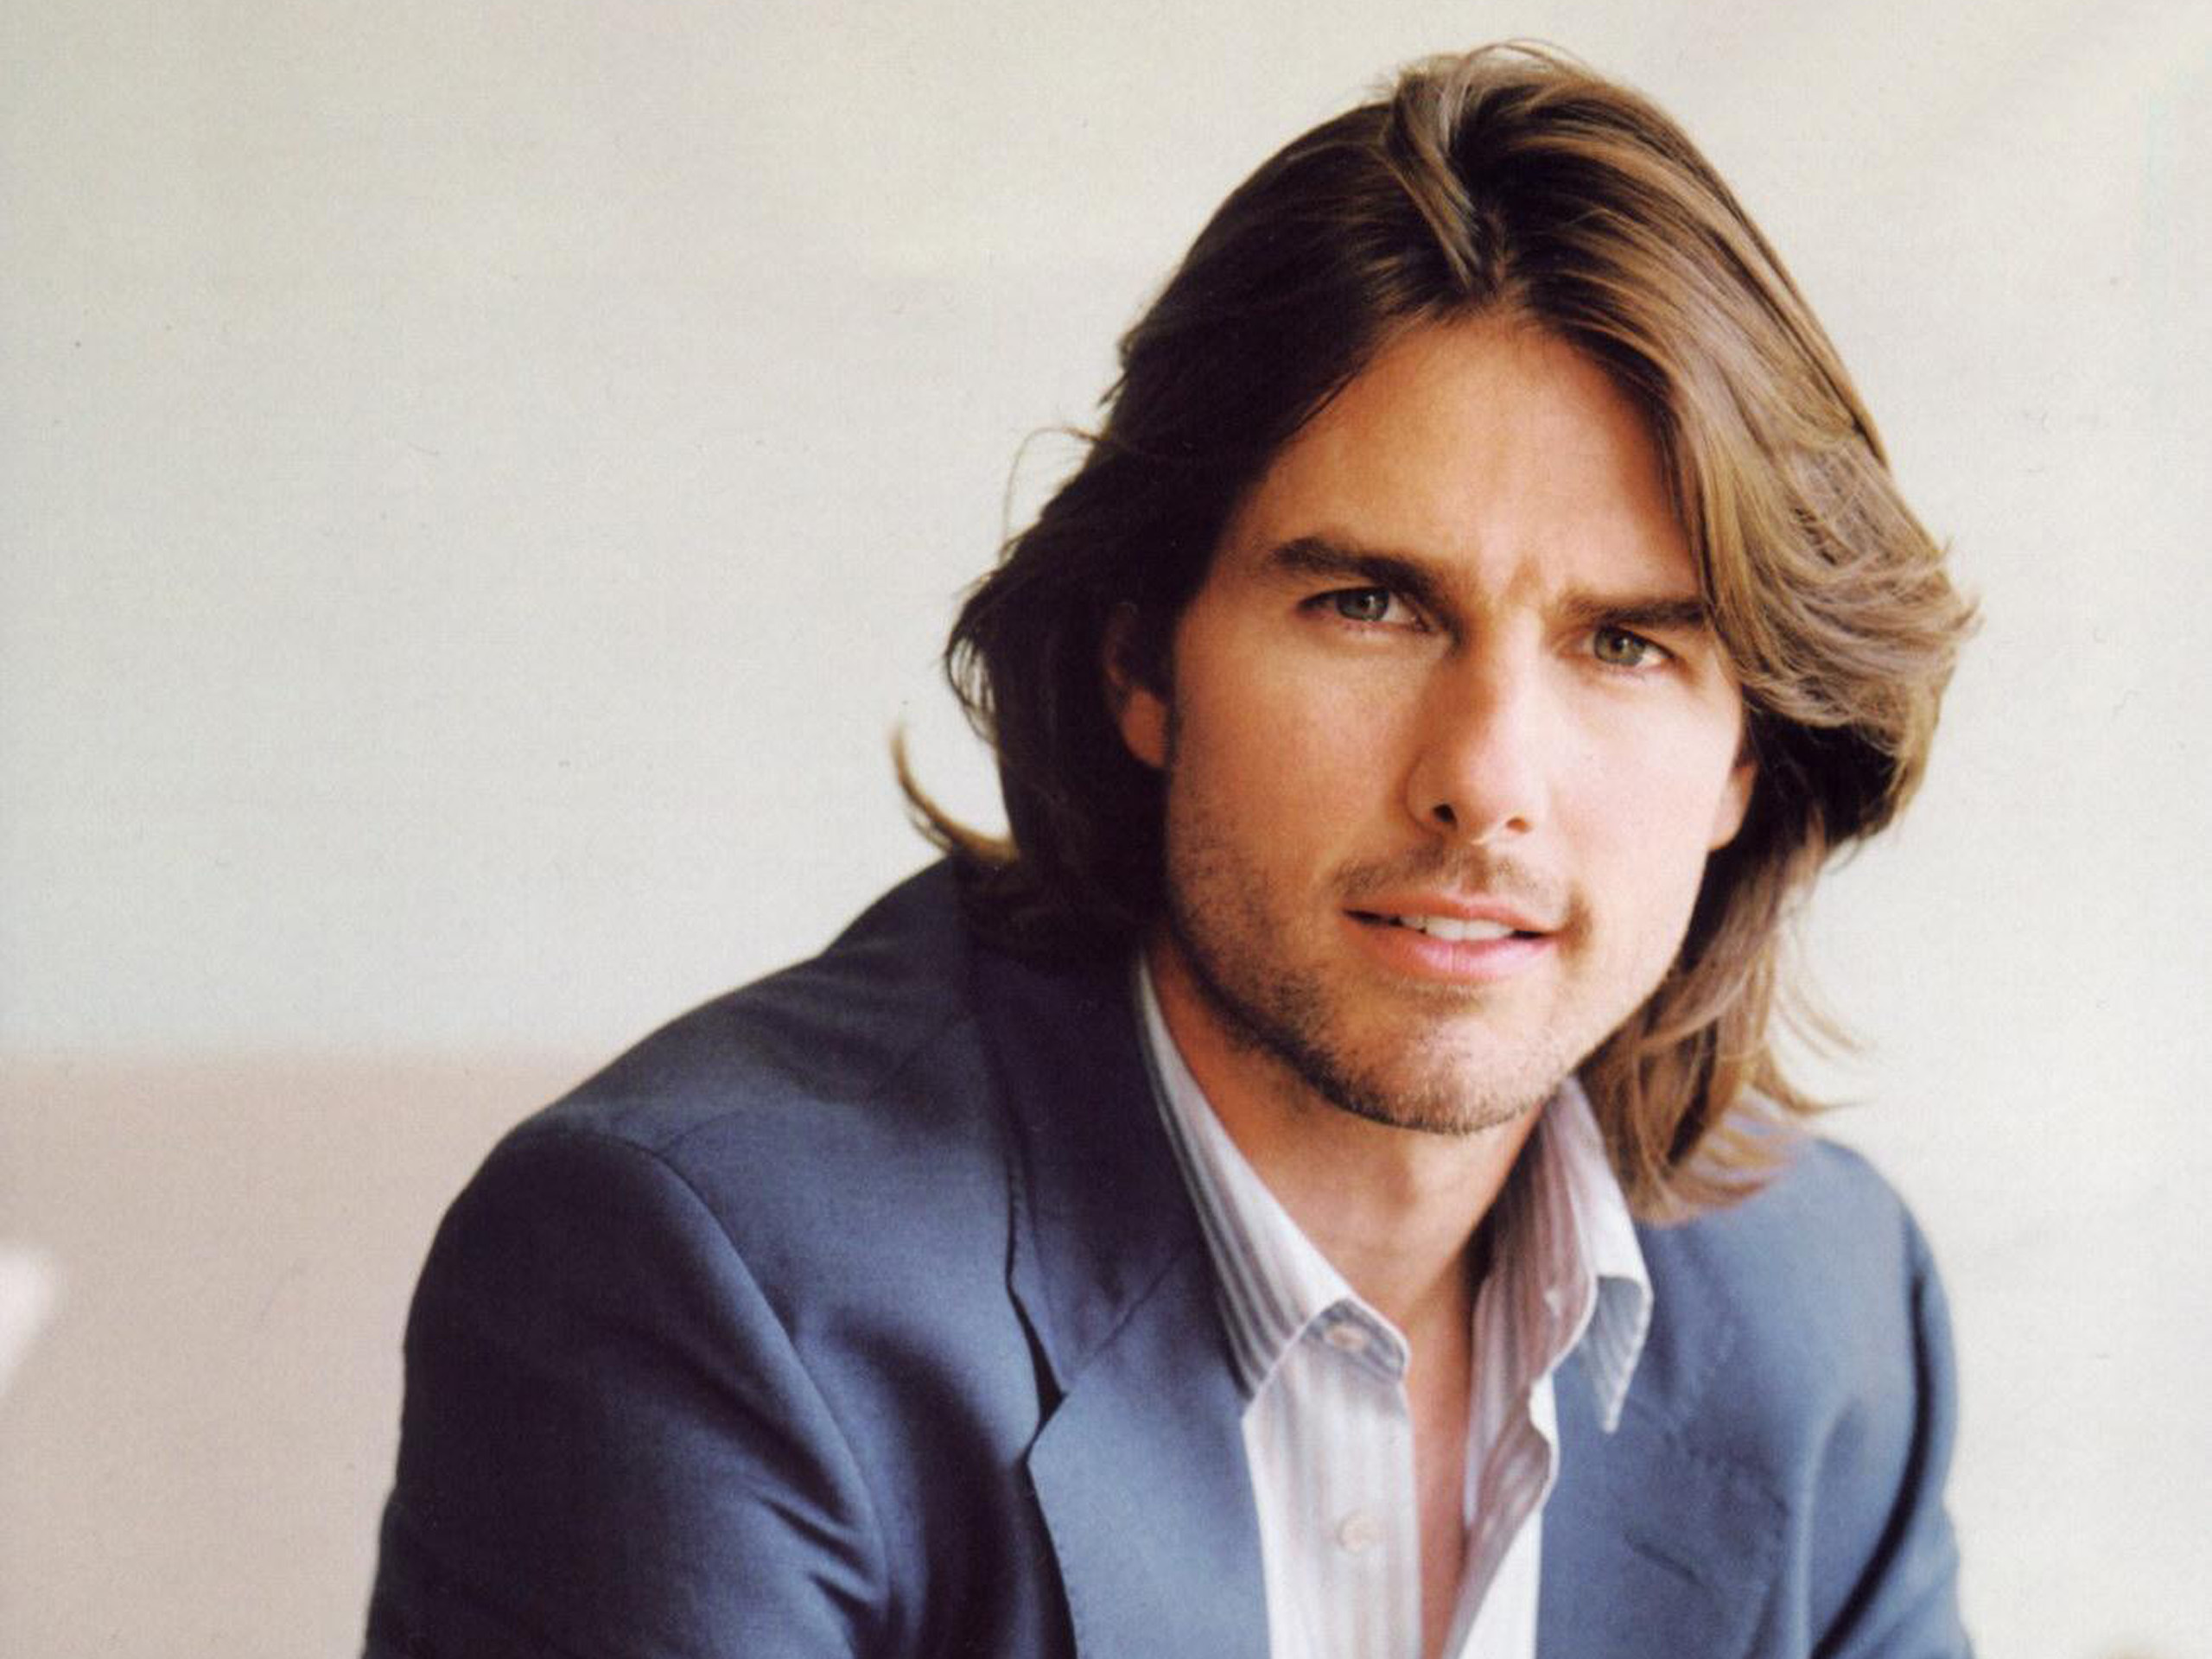 Famous movie actor Tom Cruise wallpapers and images - wallpapers